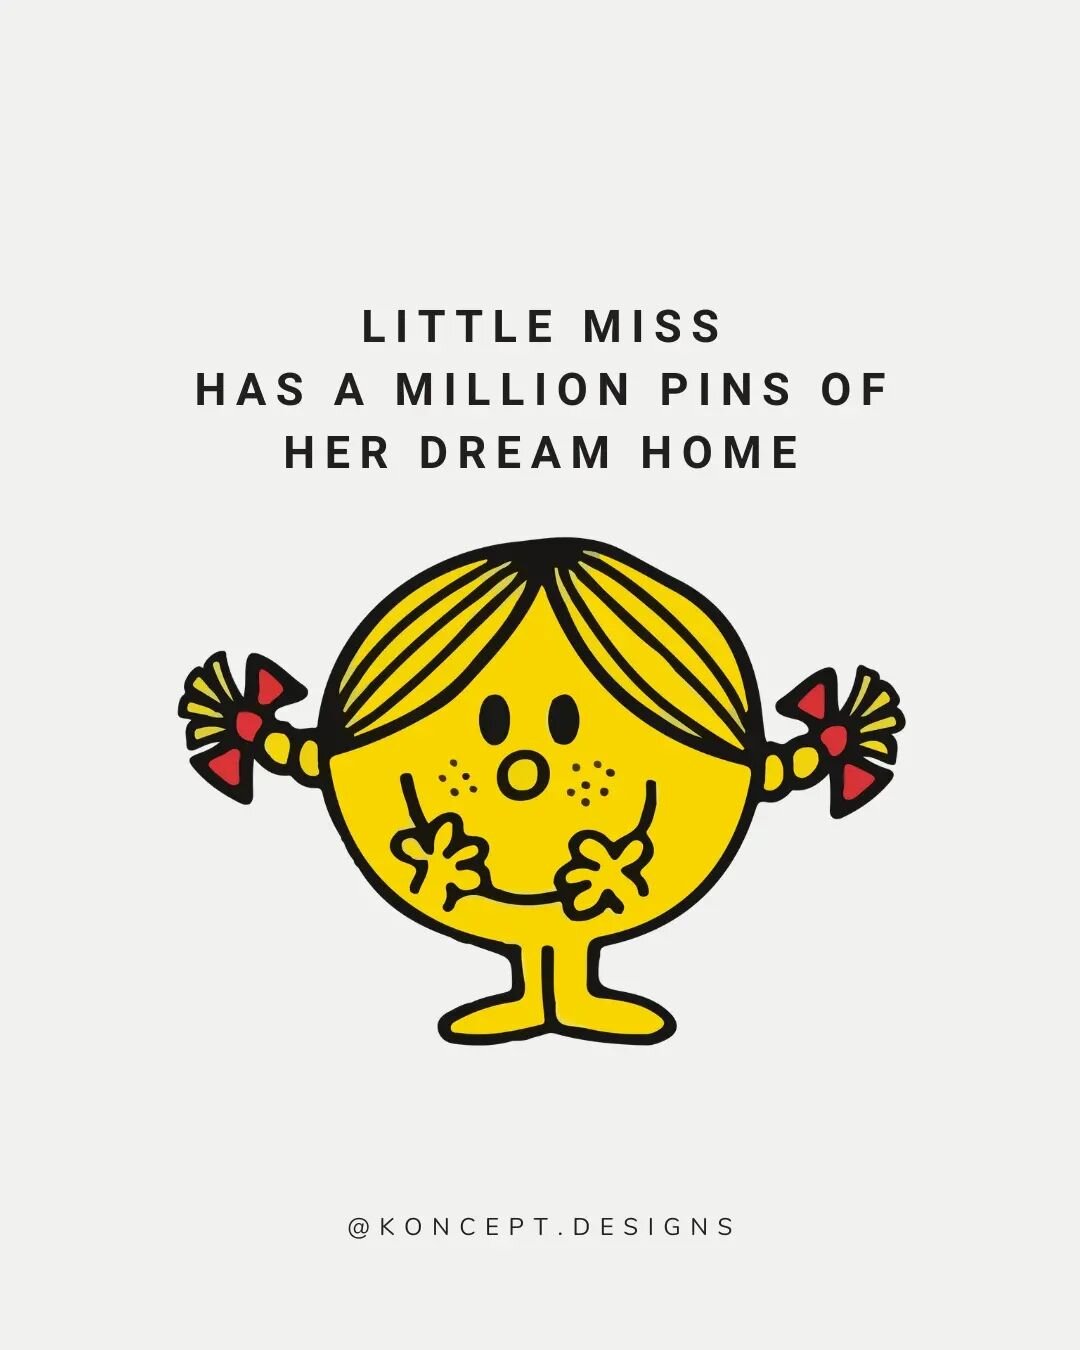 Little Miss home edition!

We couldn't help ourselves 🤣 we had to jump on this trend!

Which Little Miss are you? Swipe ➡ to find out!

Tag yourself in the one that you can relate to the most 😜 Or better yet, comment below your version of Little Mi